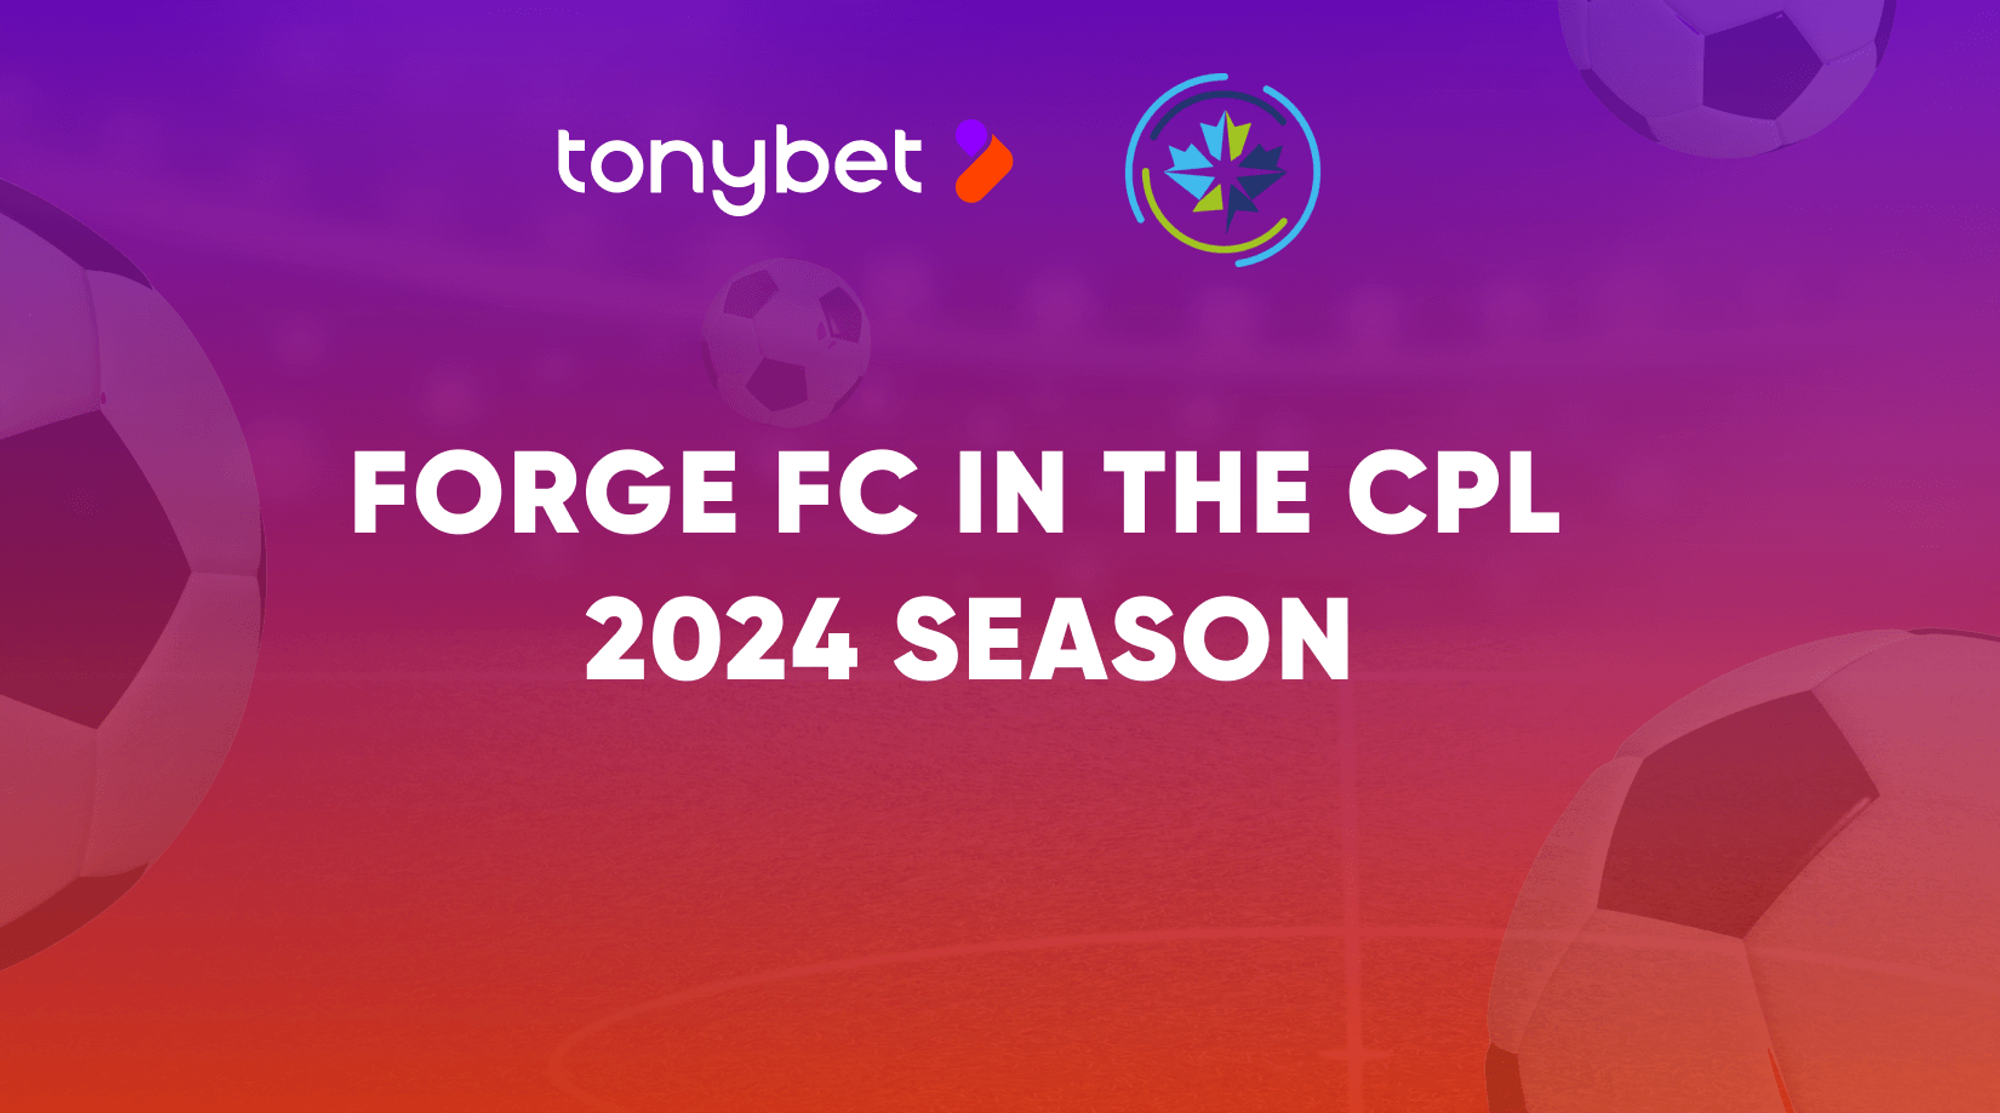 Who can stop Forge from winning the Canadian Premier League championship in the new season?